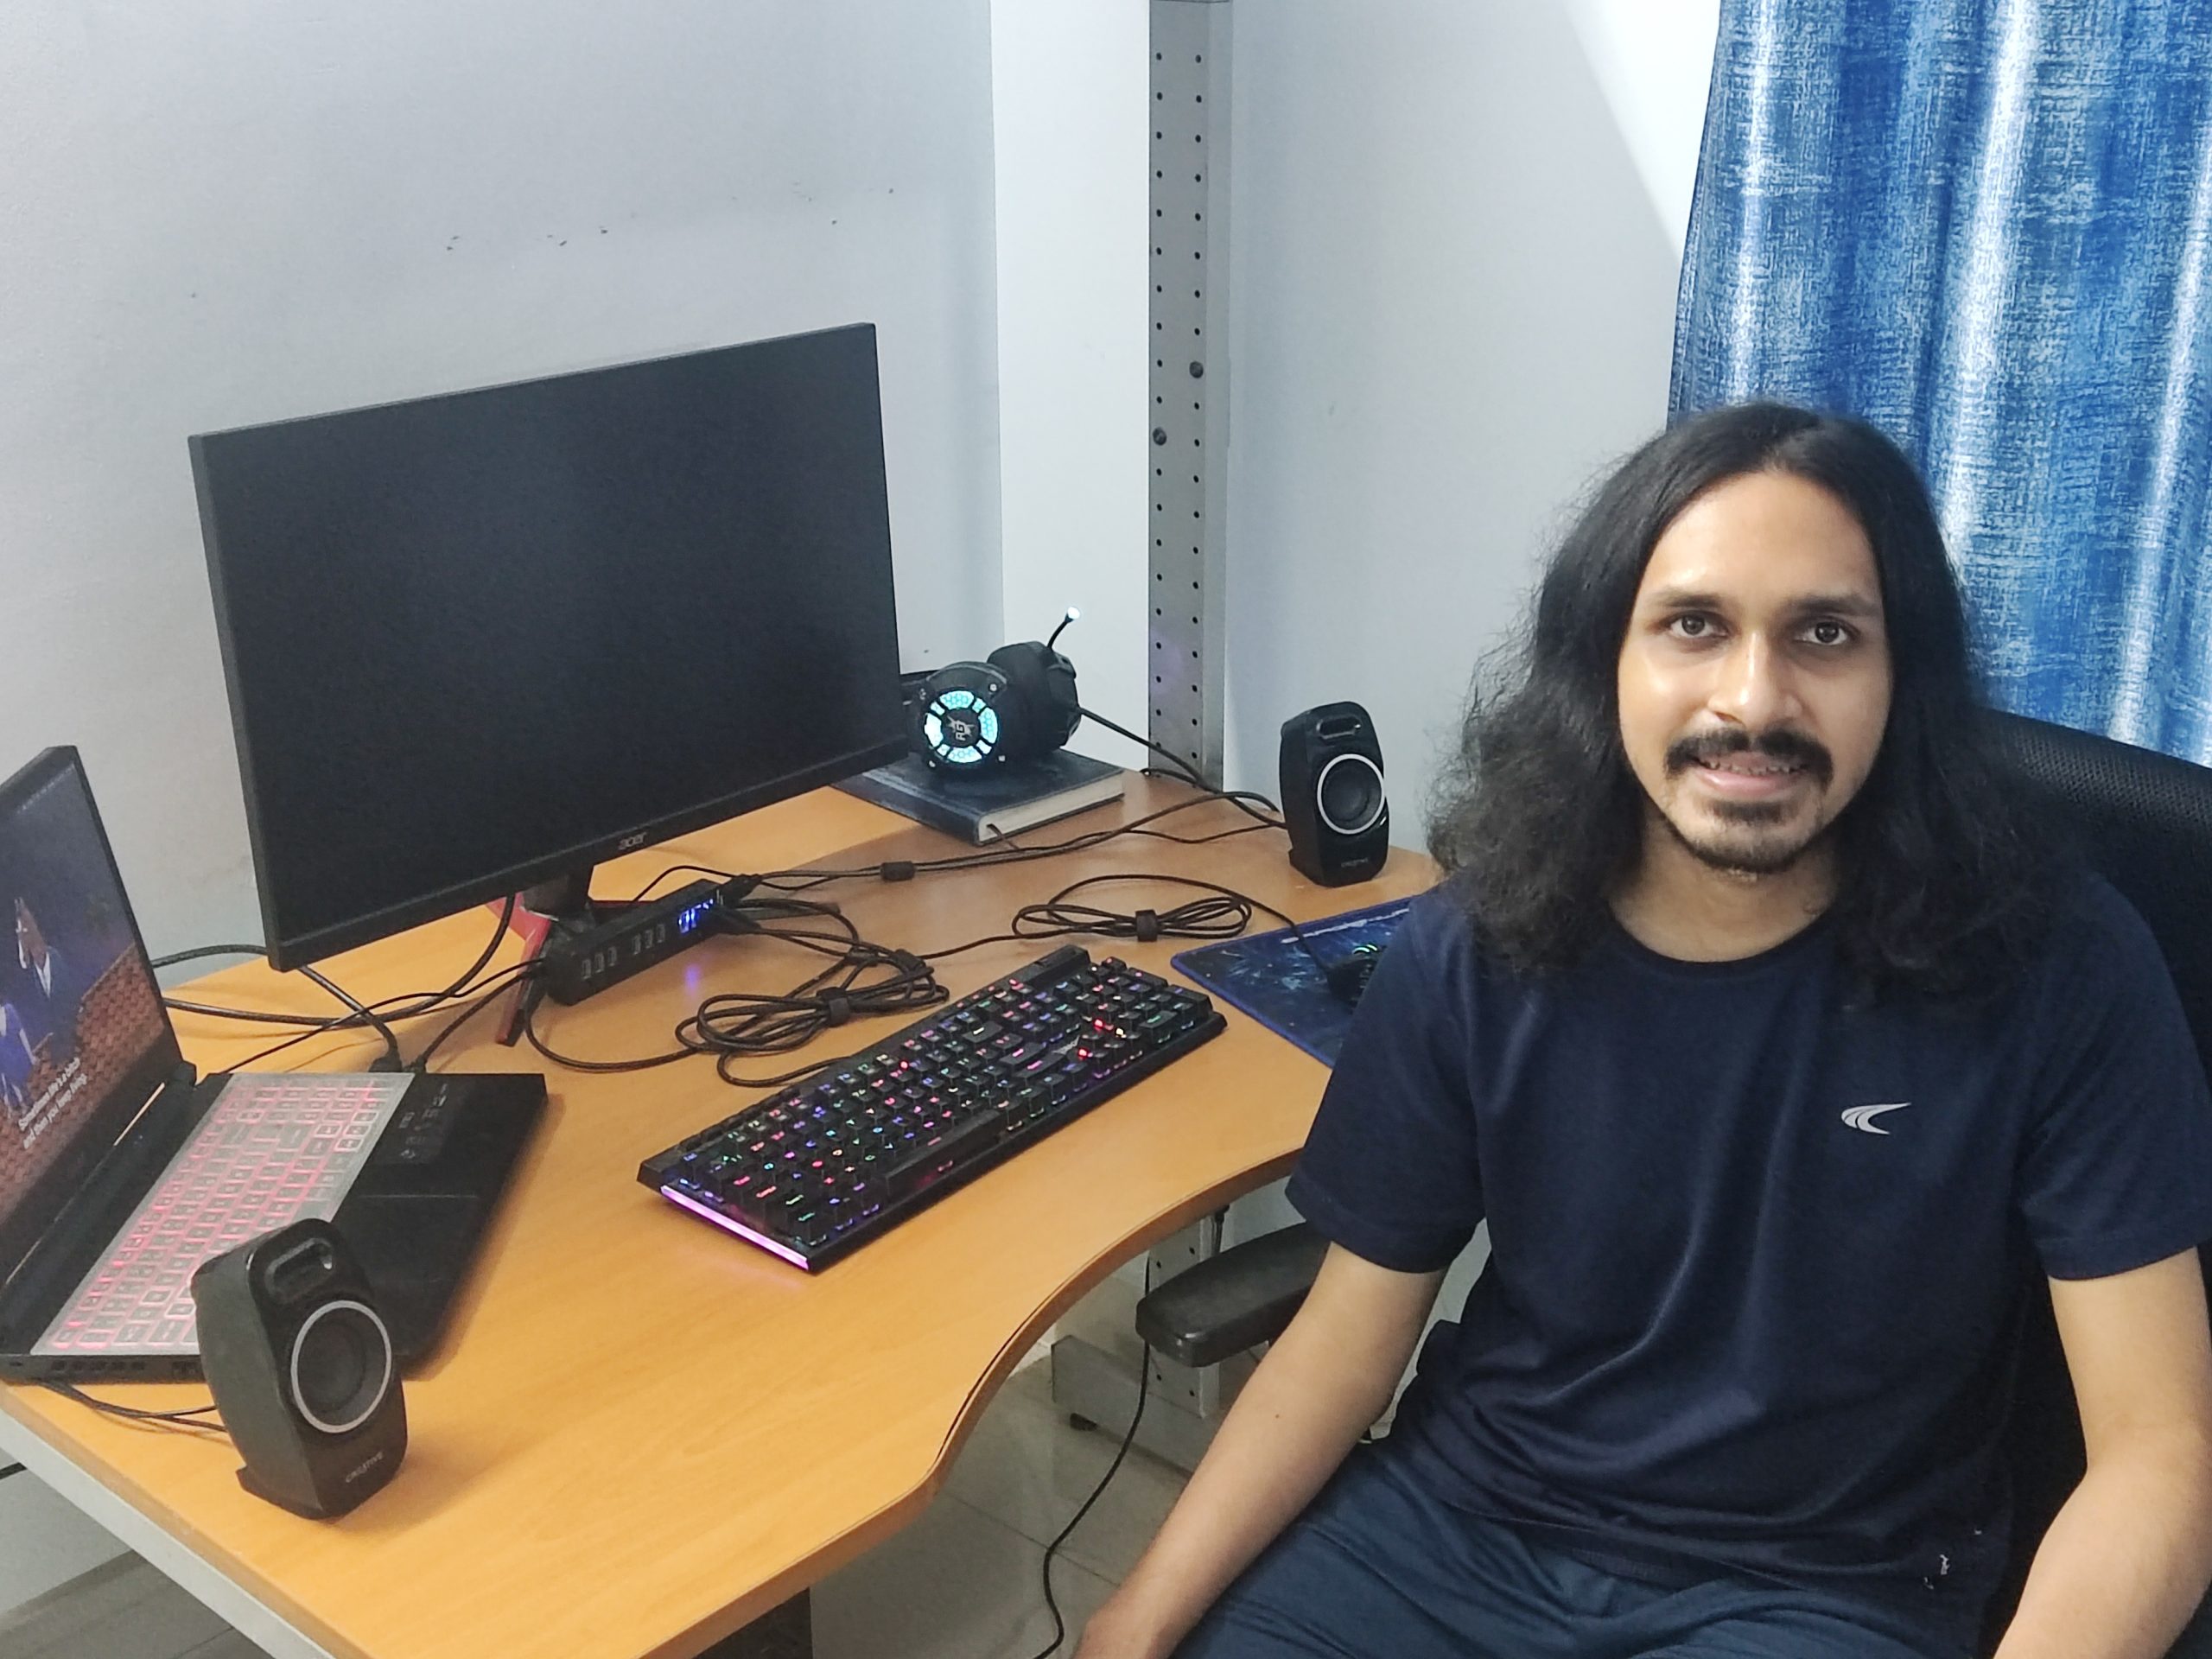 How This Self-Taught Web Developer Went Straight to a Master's Degree